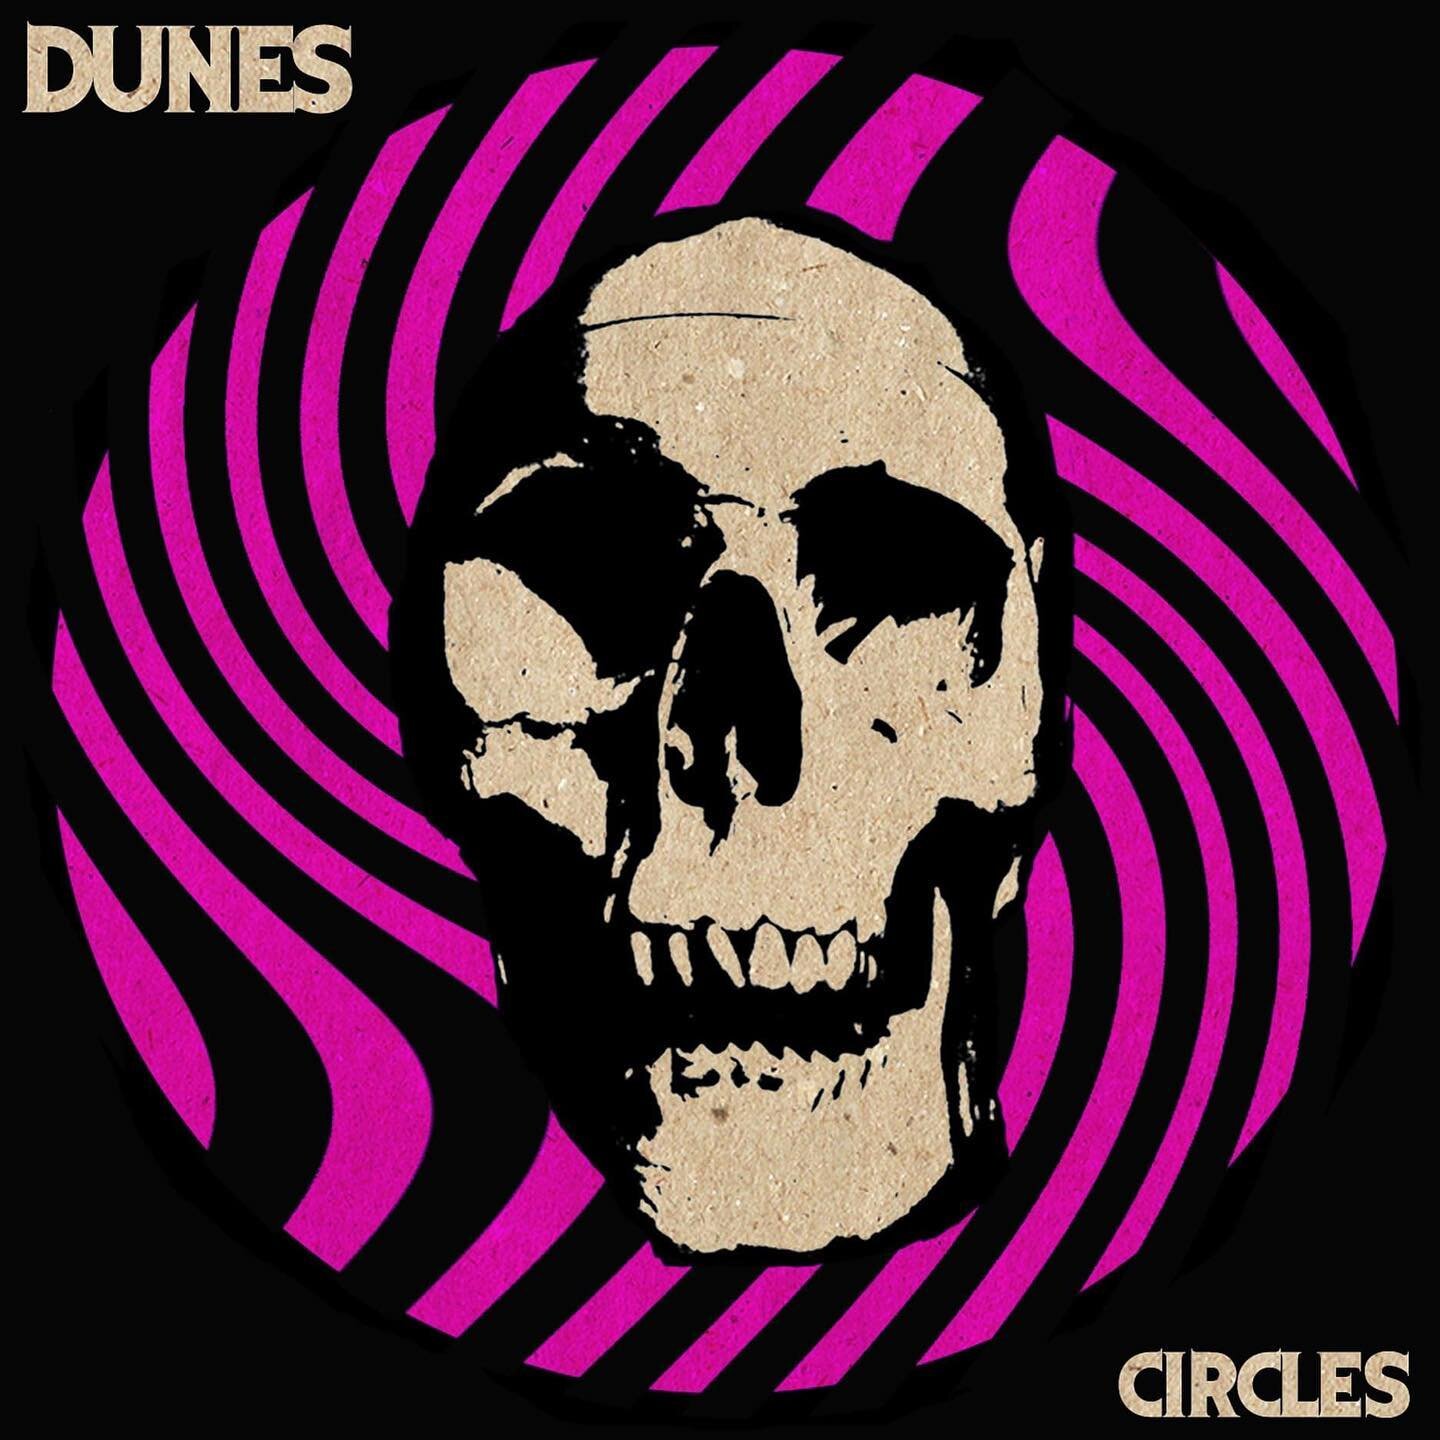 @dunesncl &ldquo;Circles&quot; all stream services 30 / 07 / 21 💀

Ltd tickets available for @lttlebuildings Newcastle show w/ @scottmcavagan &amp; @tankenginetankengine Friday Aug 6th

🎟 @ticketwebuk